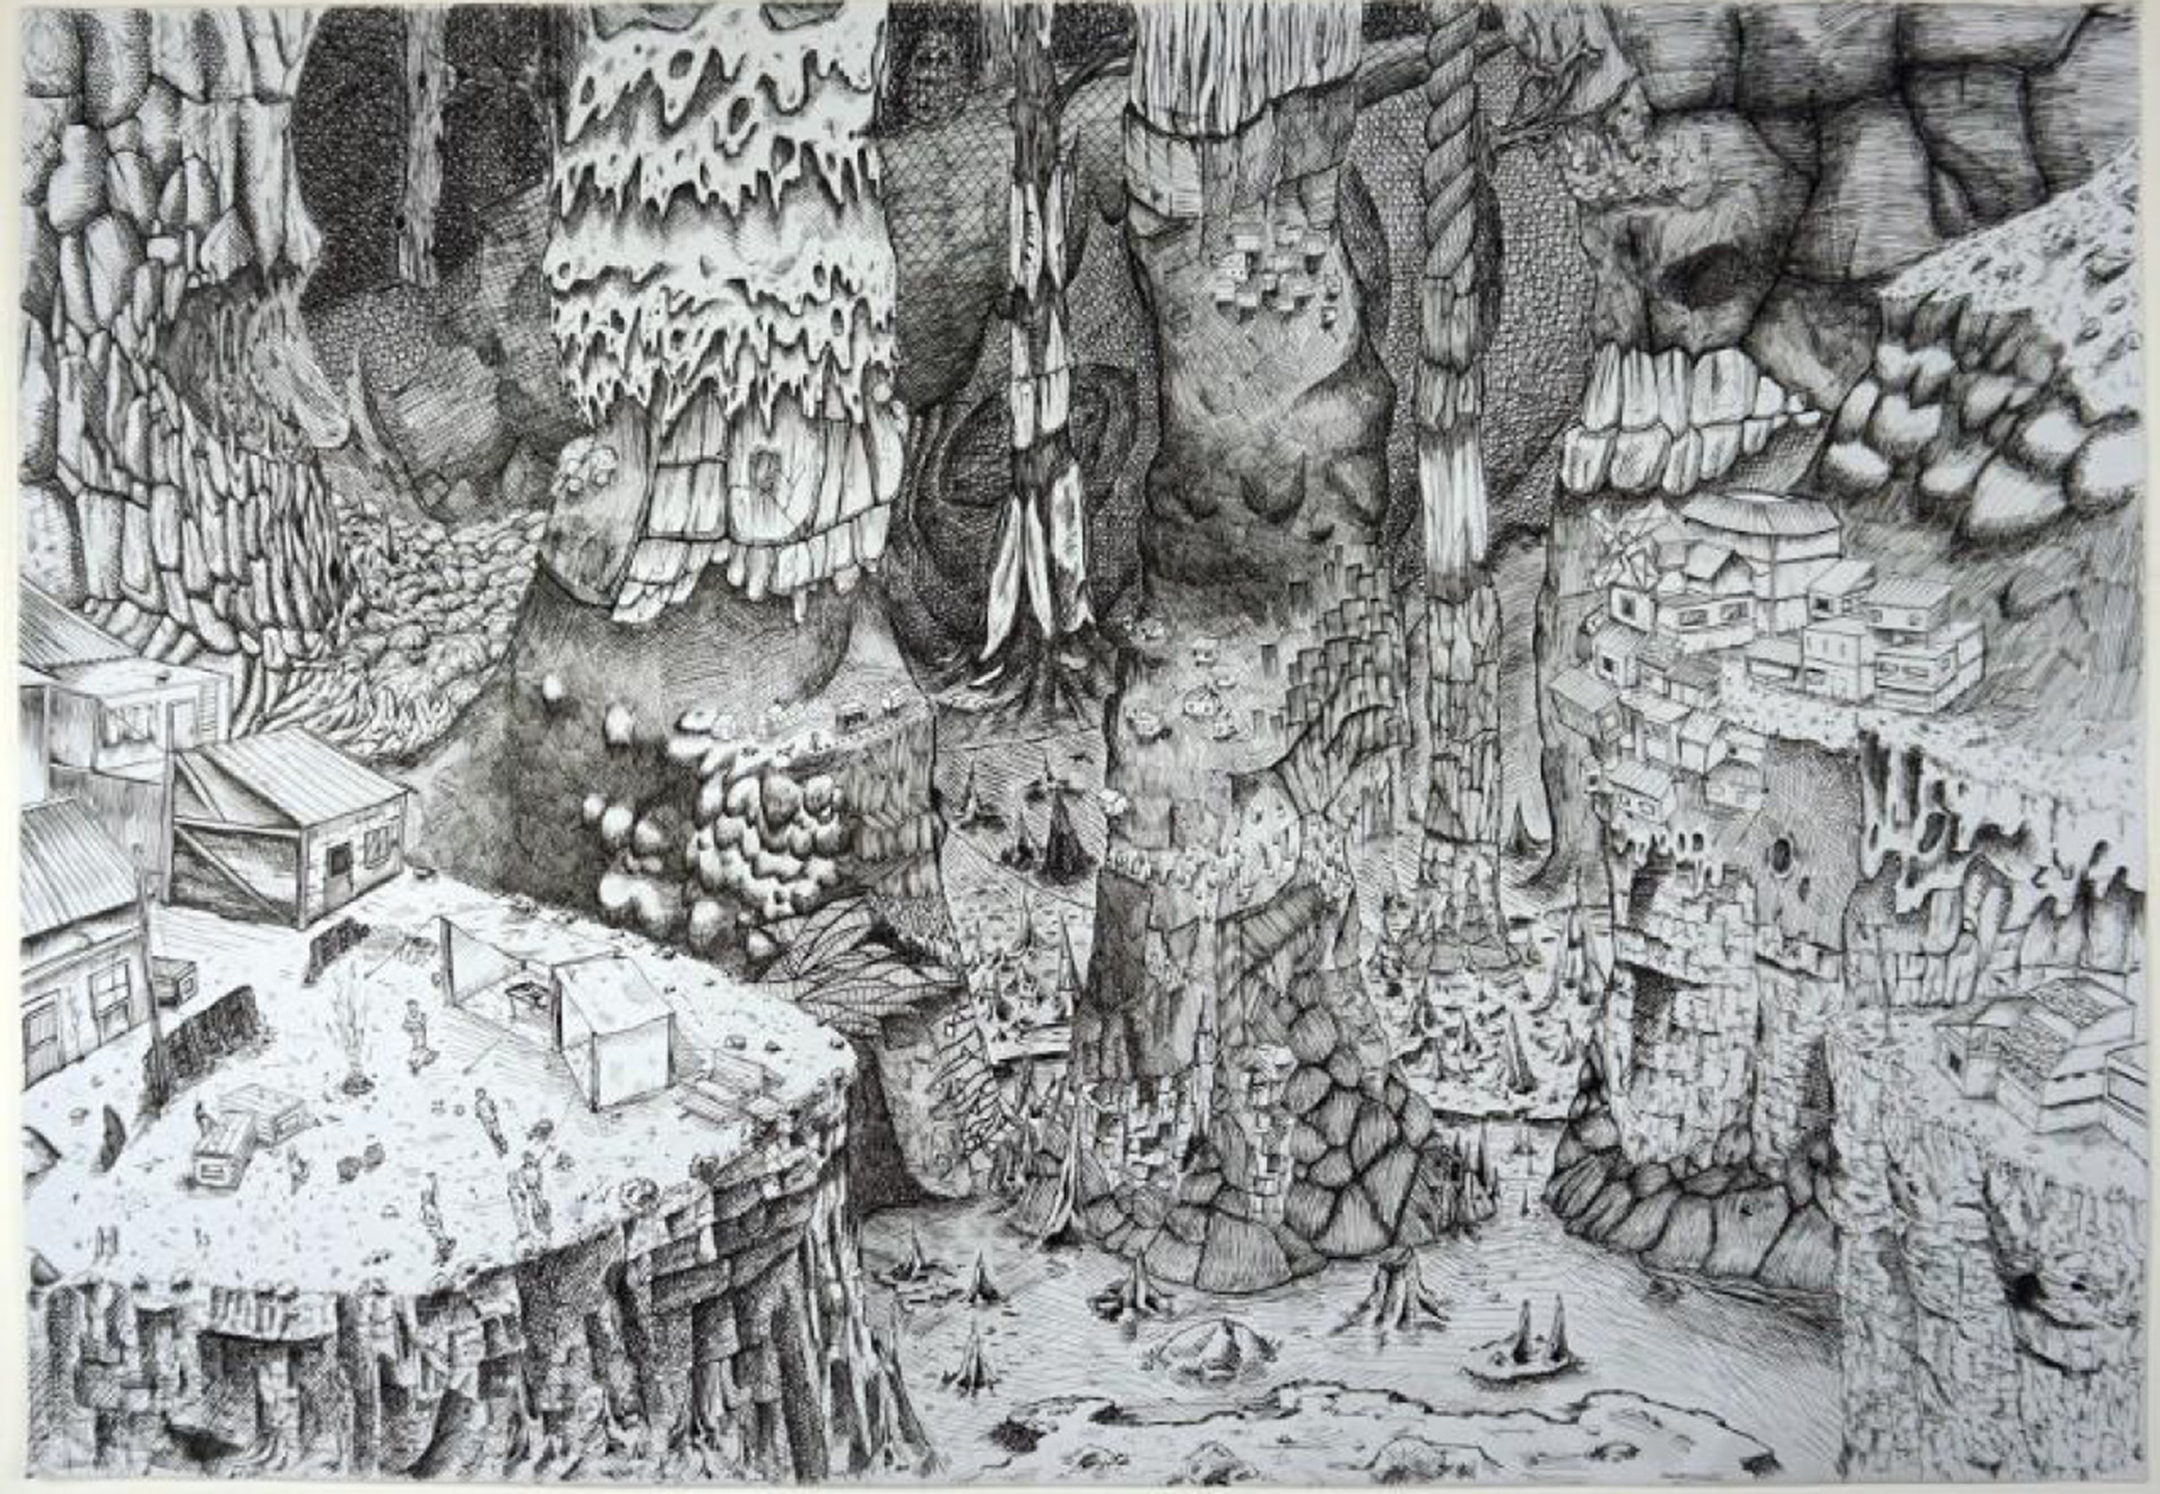 Black and white illustration of creatures in a woodland-like environment